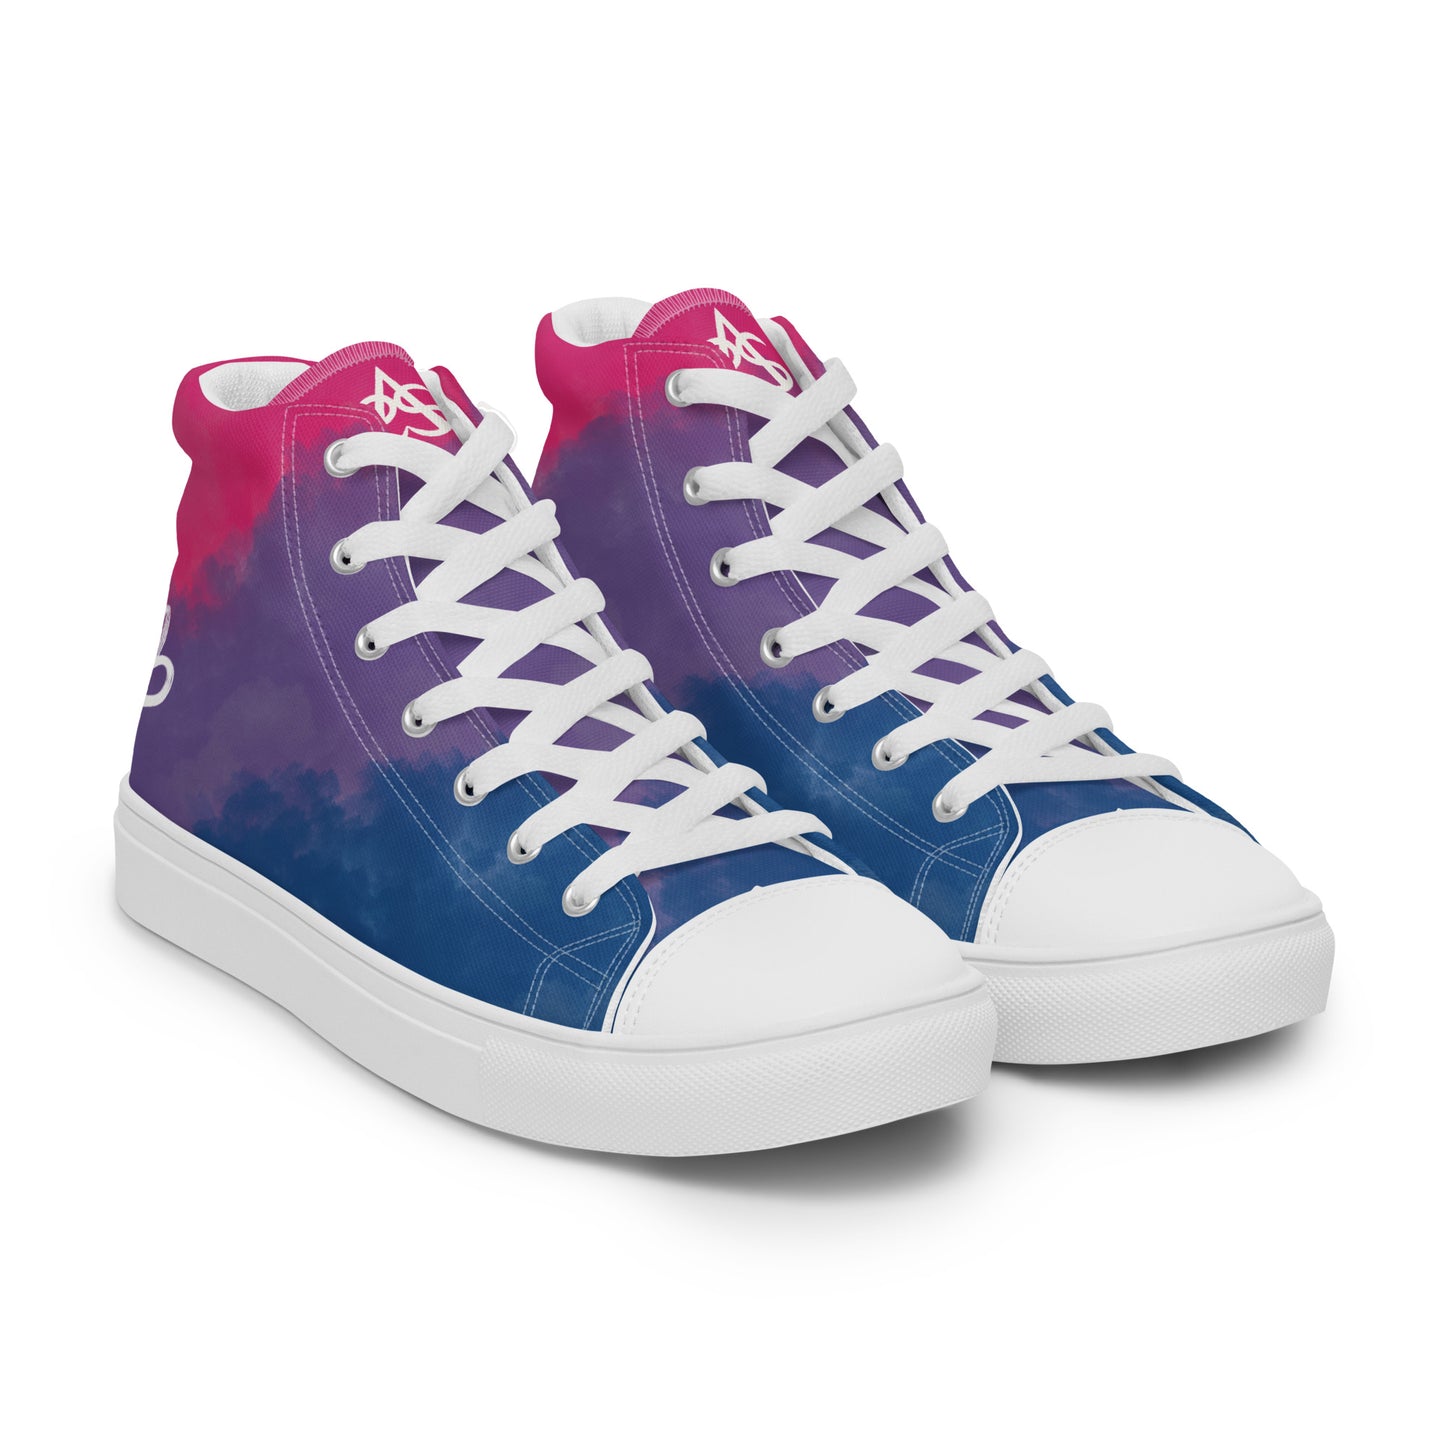 Right front view: a pair of high top shoes with color block pink, purple, and blue clouds, a white hand drawn heart, and the Aras Sivad logo on the back.